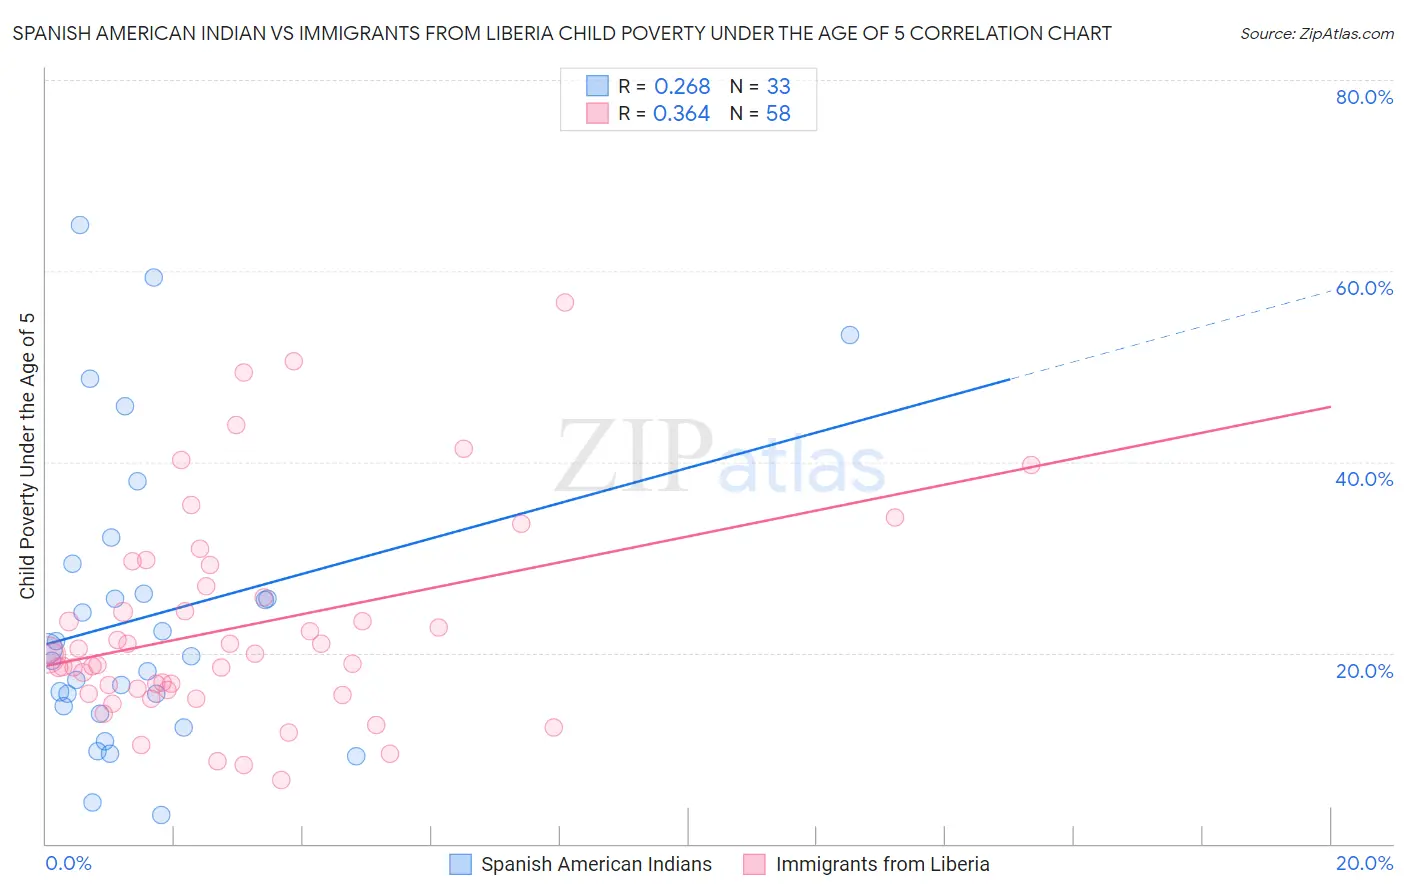 Spanish American Indian vs Immigrants from Liberia Child Poverty Under the Age of 5